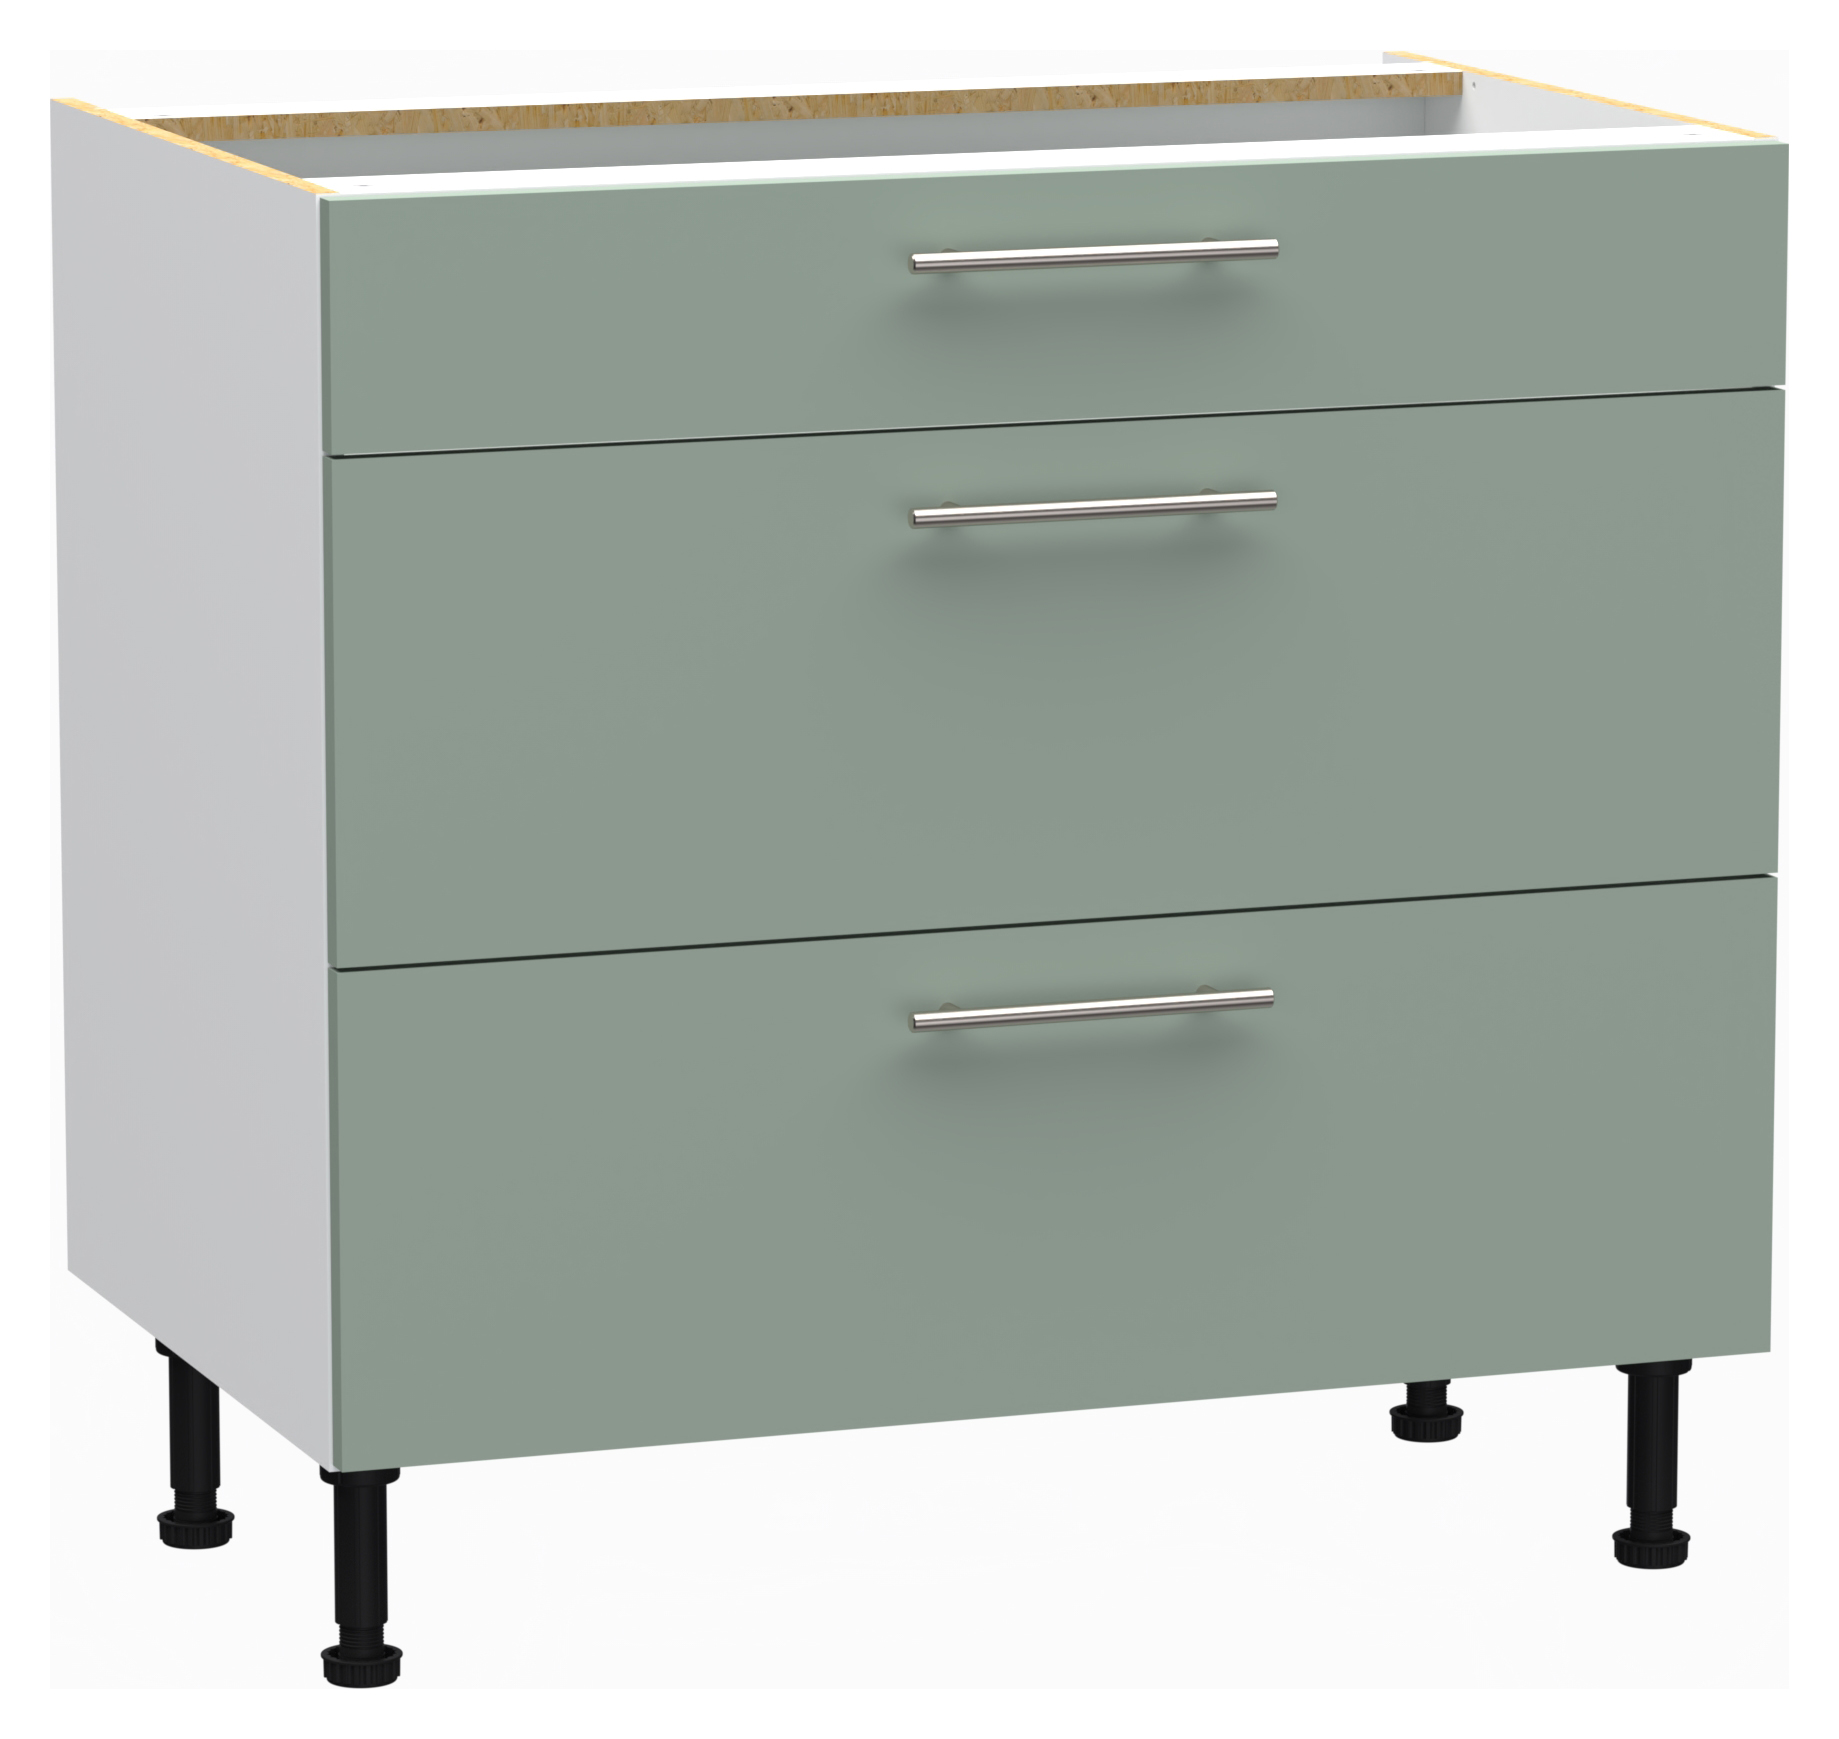 Wickes Orlando Reed Green Drawer Unit - 900mm (Part 1 of 2)